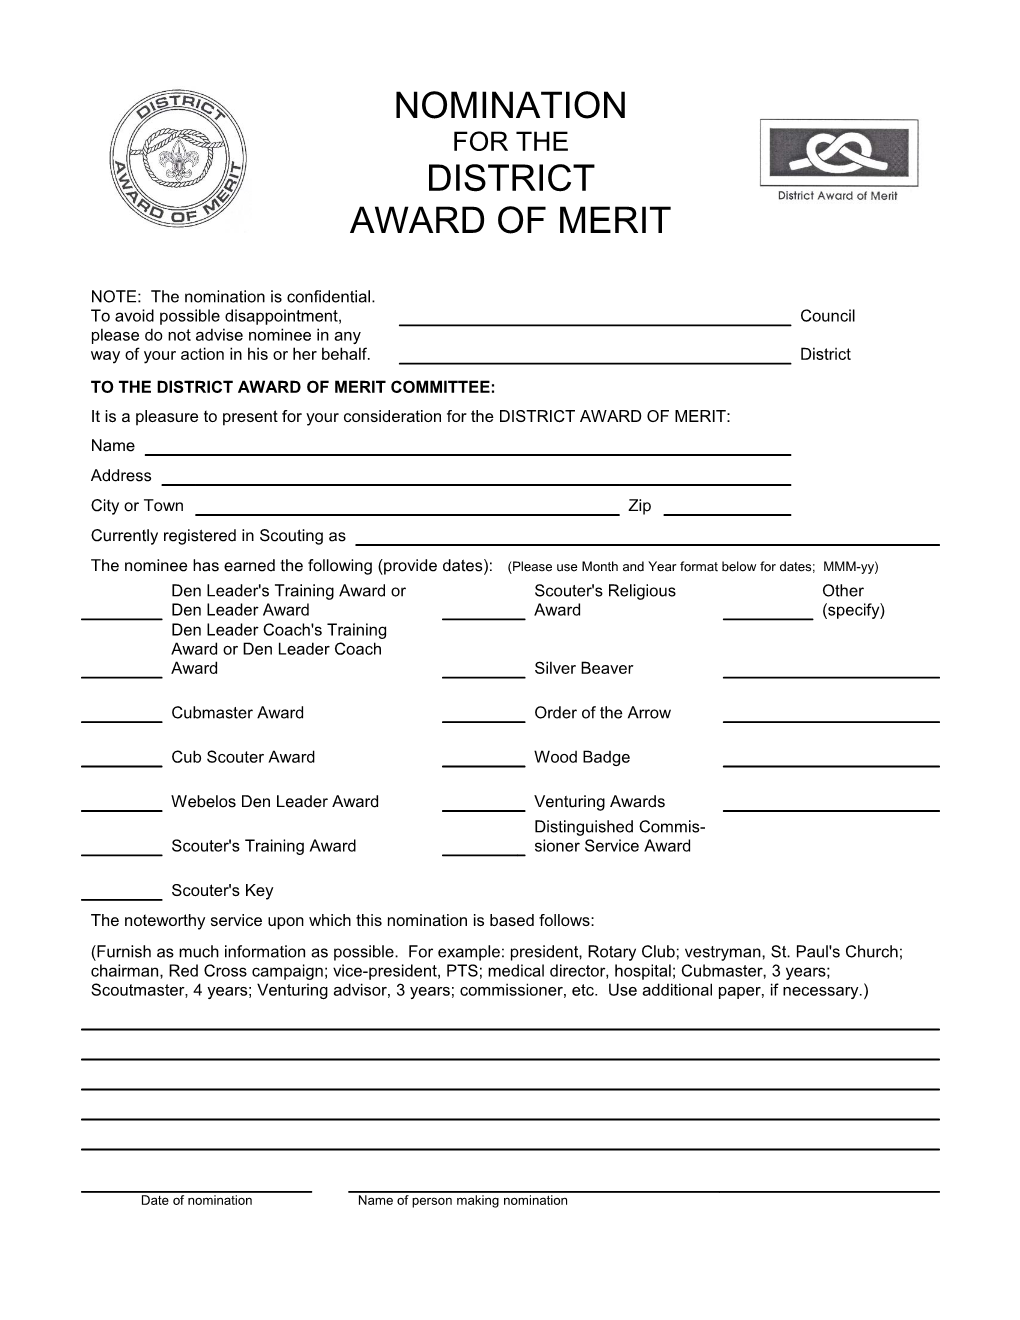 Nomination for the District Award of Merit